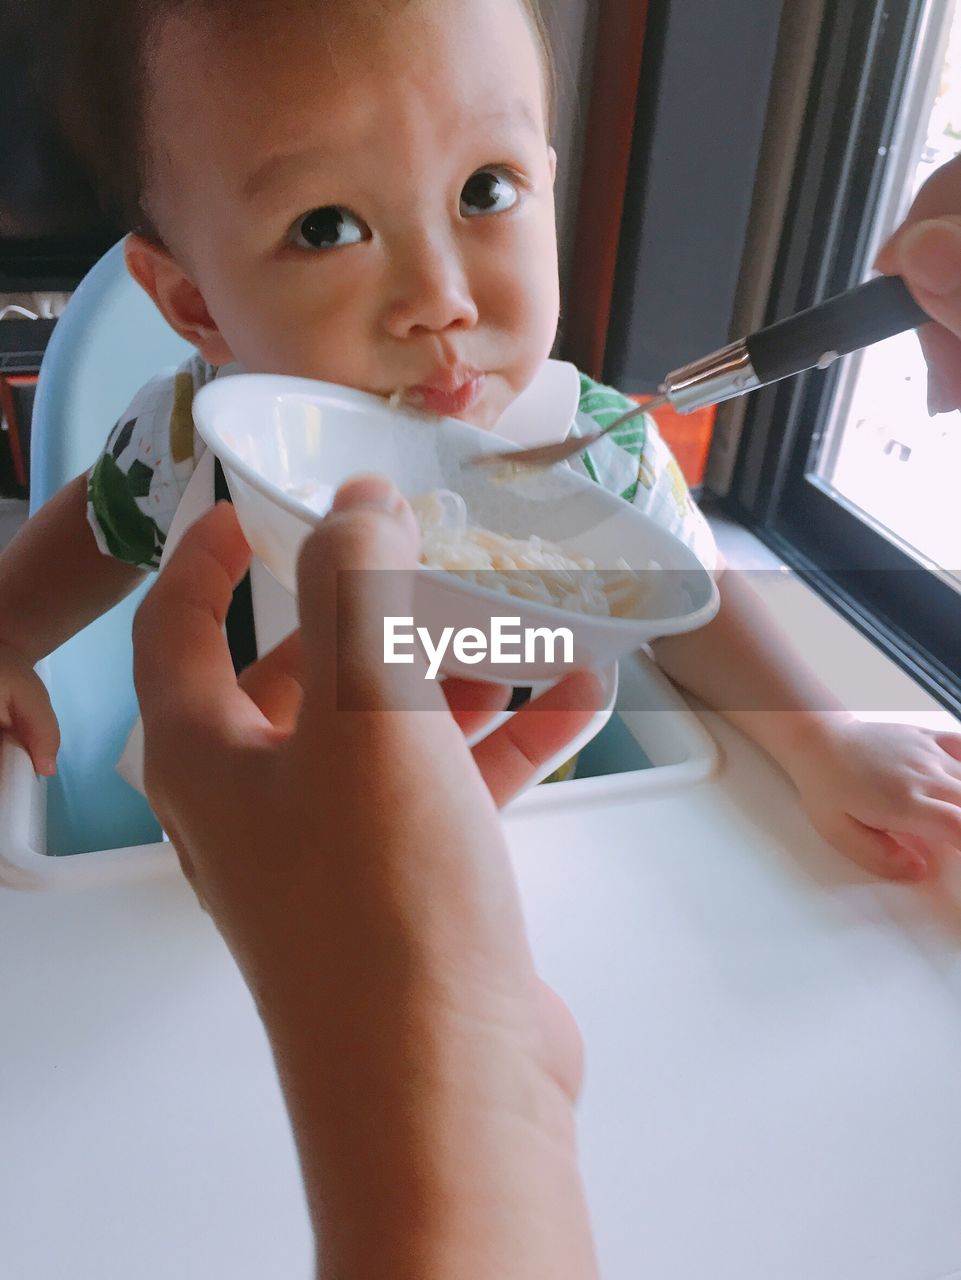 CLOSE-UP OF CUTE BABY EATING ICE CREAM